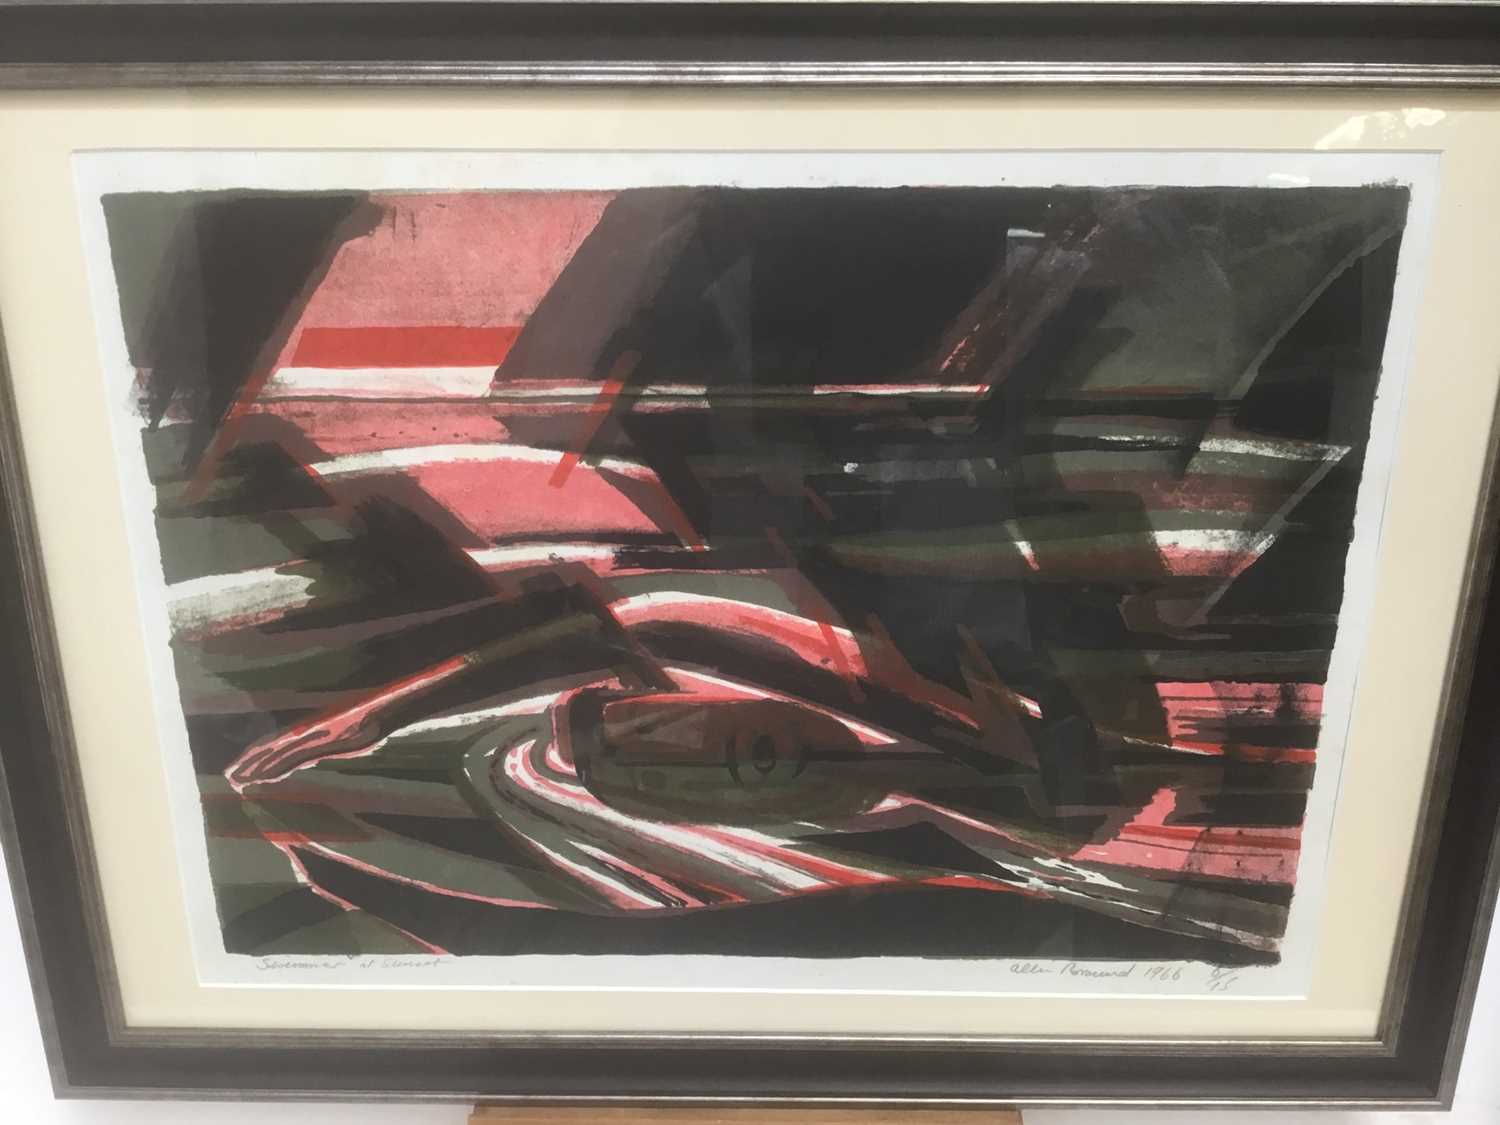 Lot 184 - Allin Braund (1915-2004) print 'Swimmer at sunset' 1966, numbered 6/15